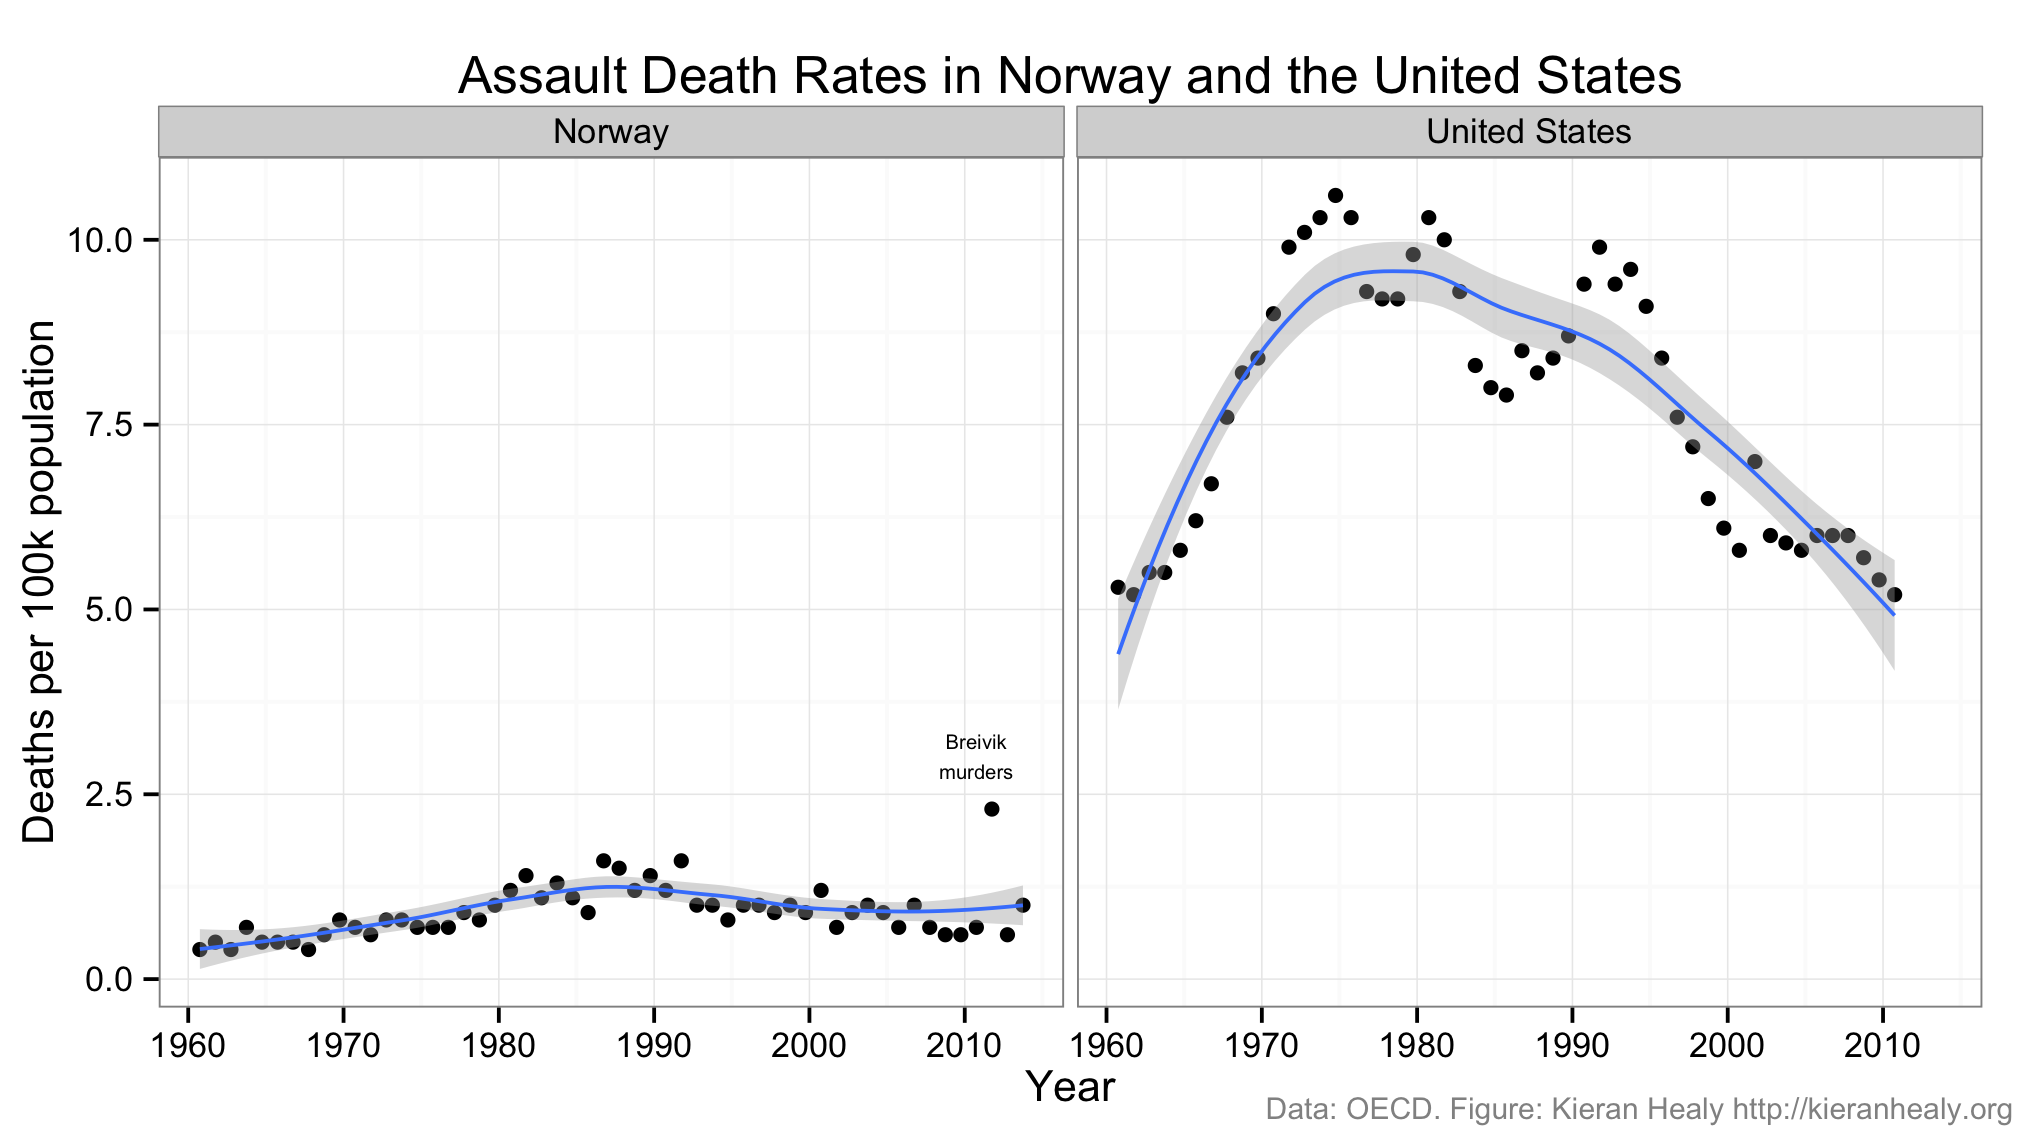 Assault Death rates in Norway and the United States, 1960-2013.